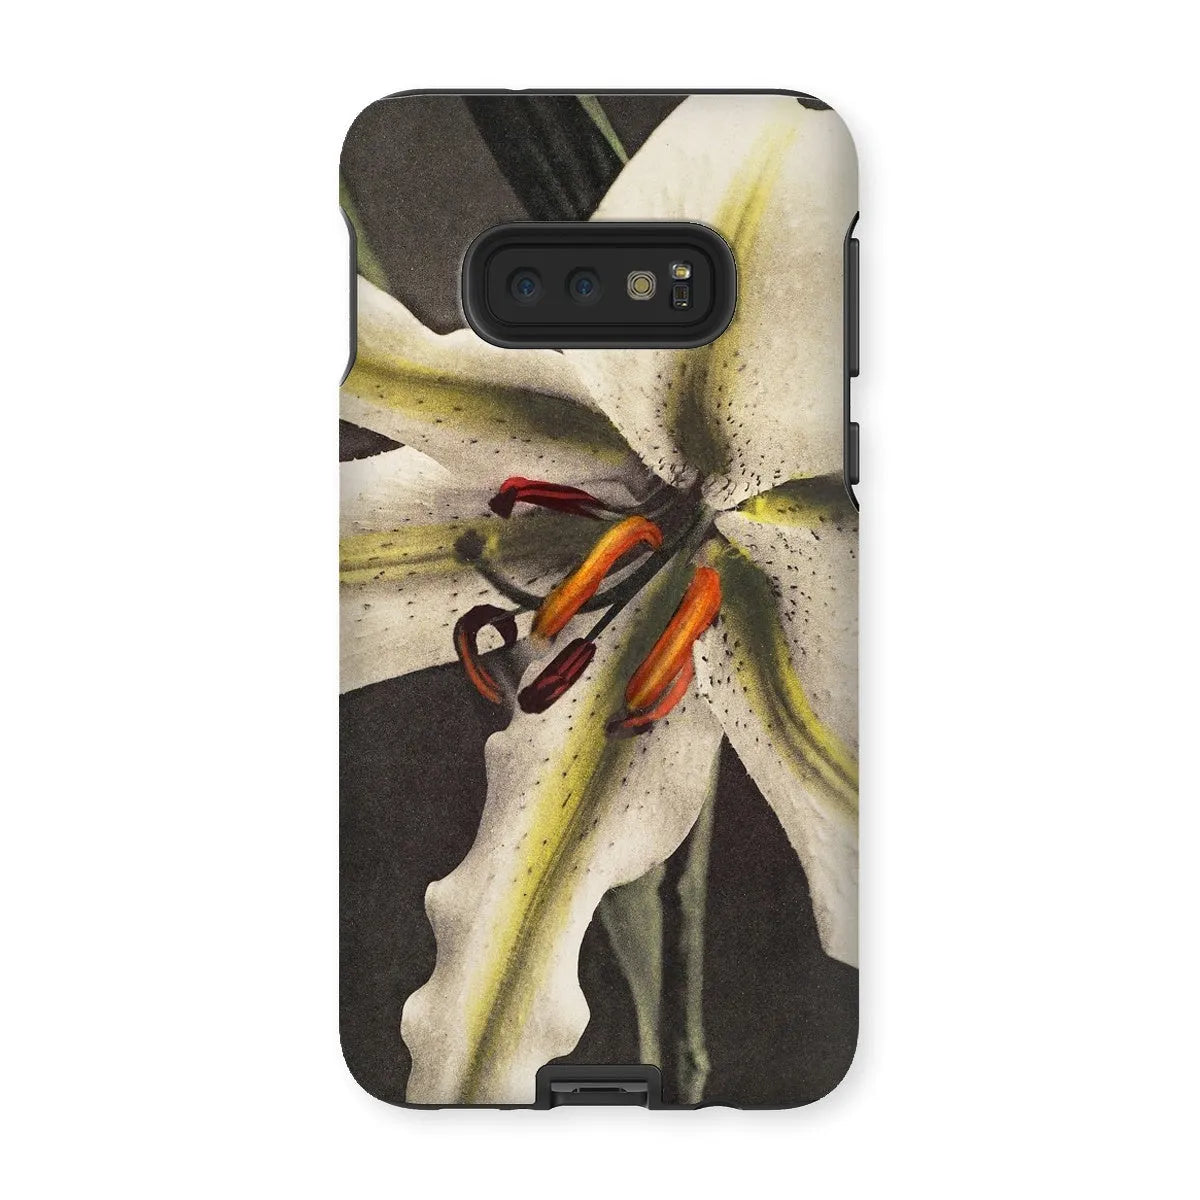 Lily By Kazumasa Ogawa Art Phone Case - Samsung Galaxy S10e / Matte - Mobile Phone Cases - Aesthetic Art